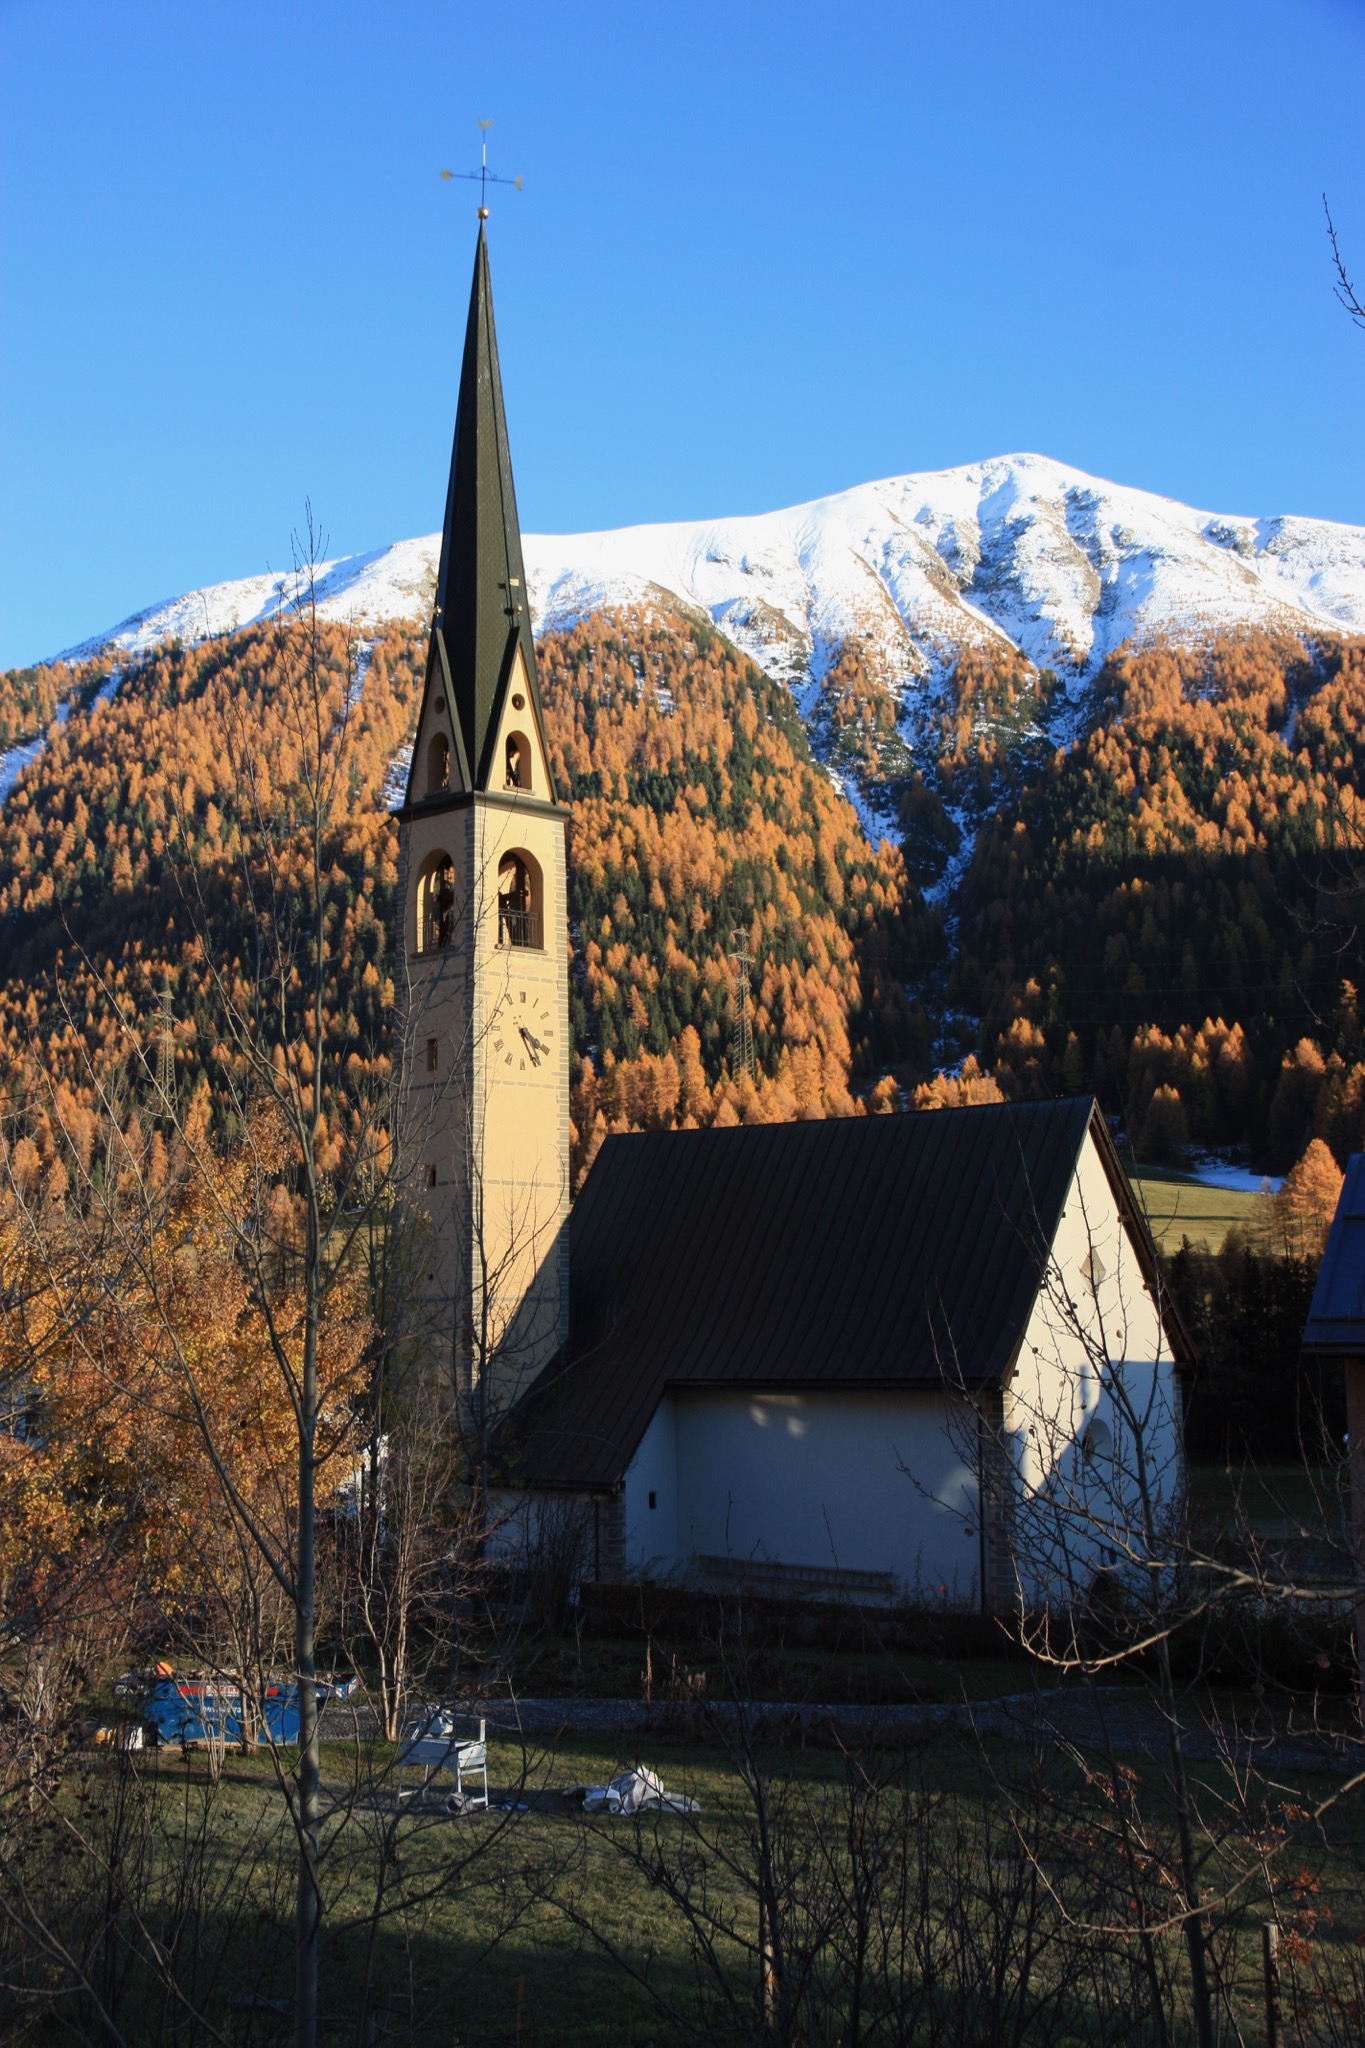 The reformist church in S-chanf in the afternoon sun of autumn.